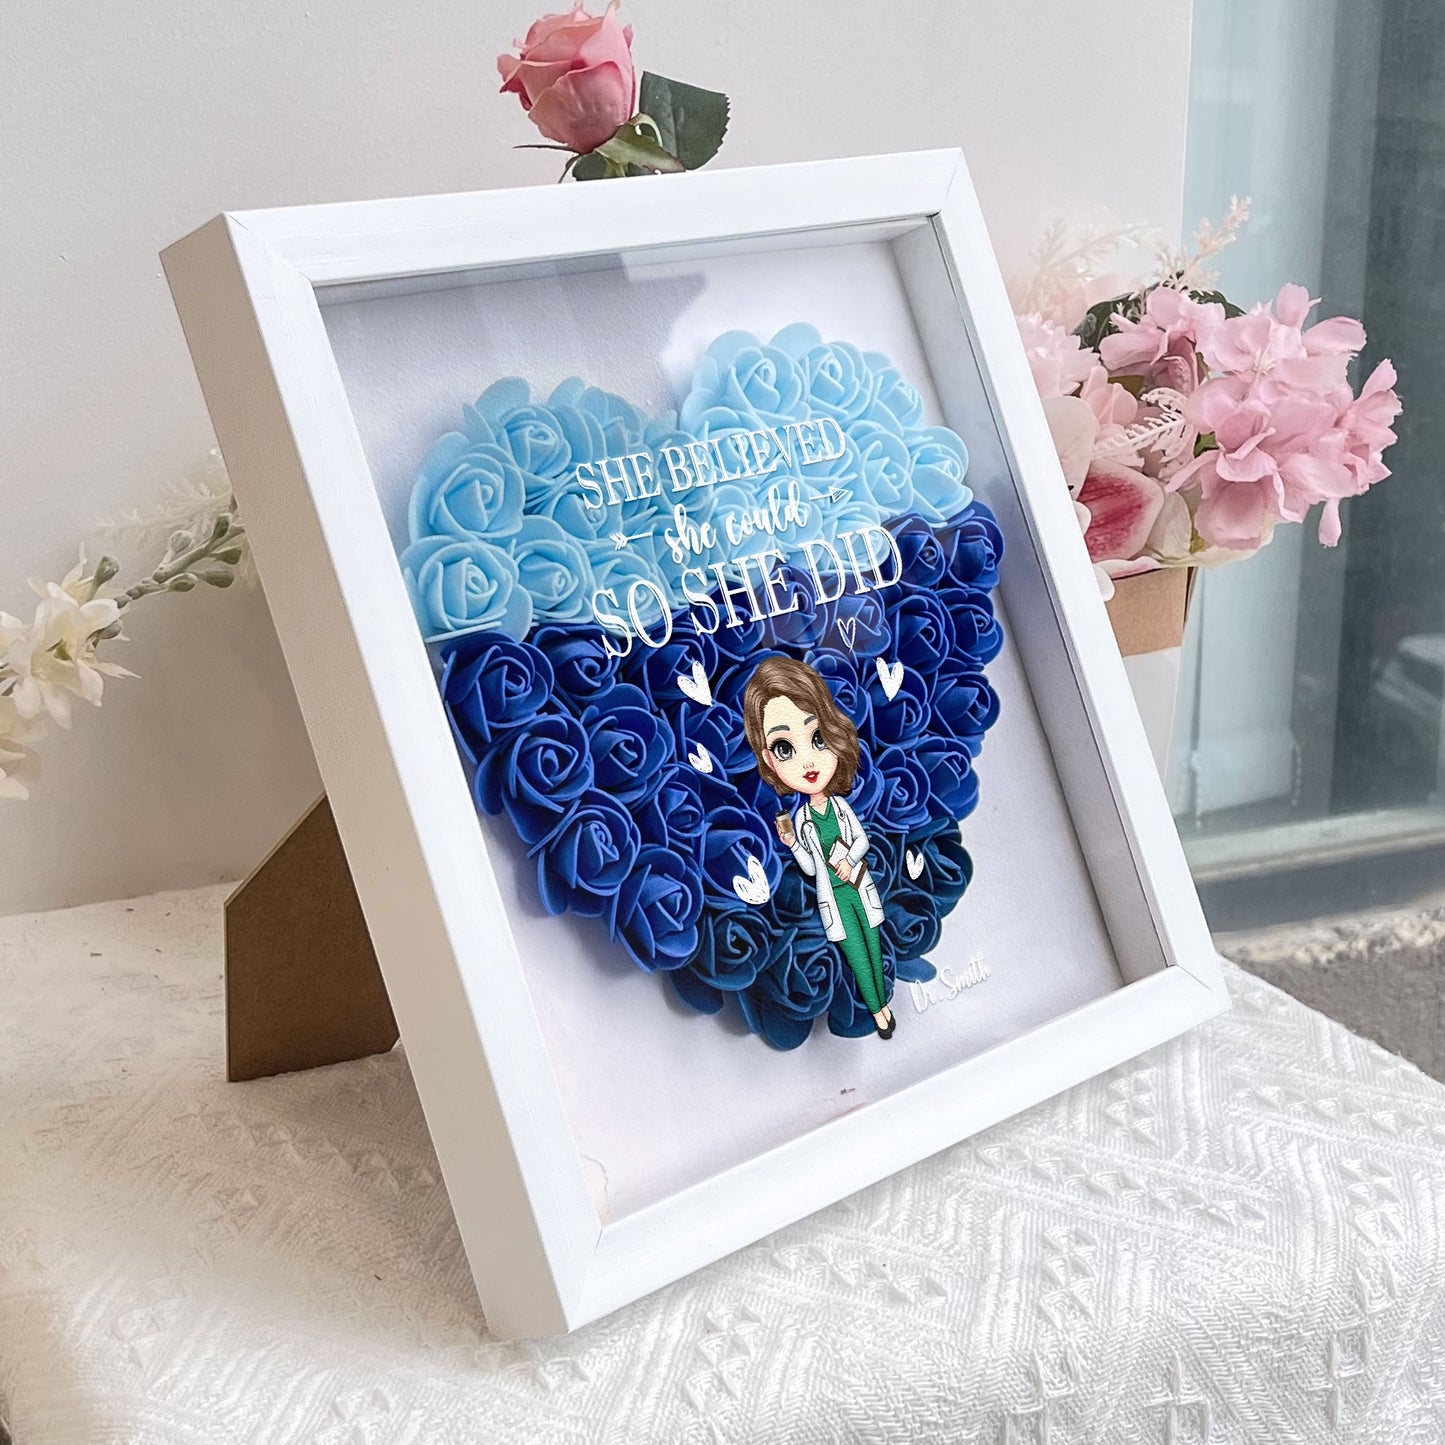 She Believed She Could - Personalized Flower Shadow Box